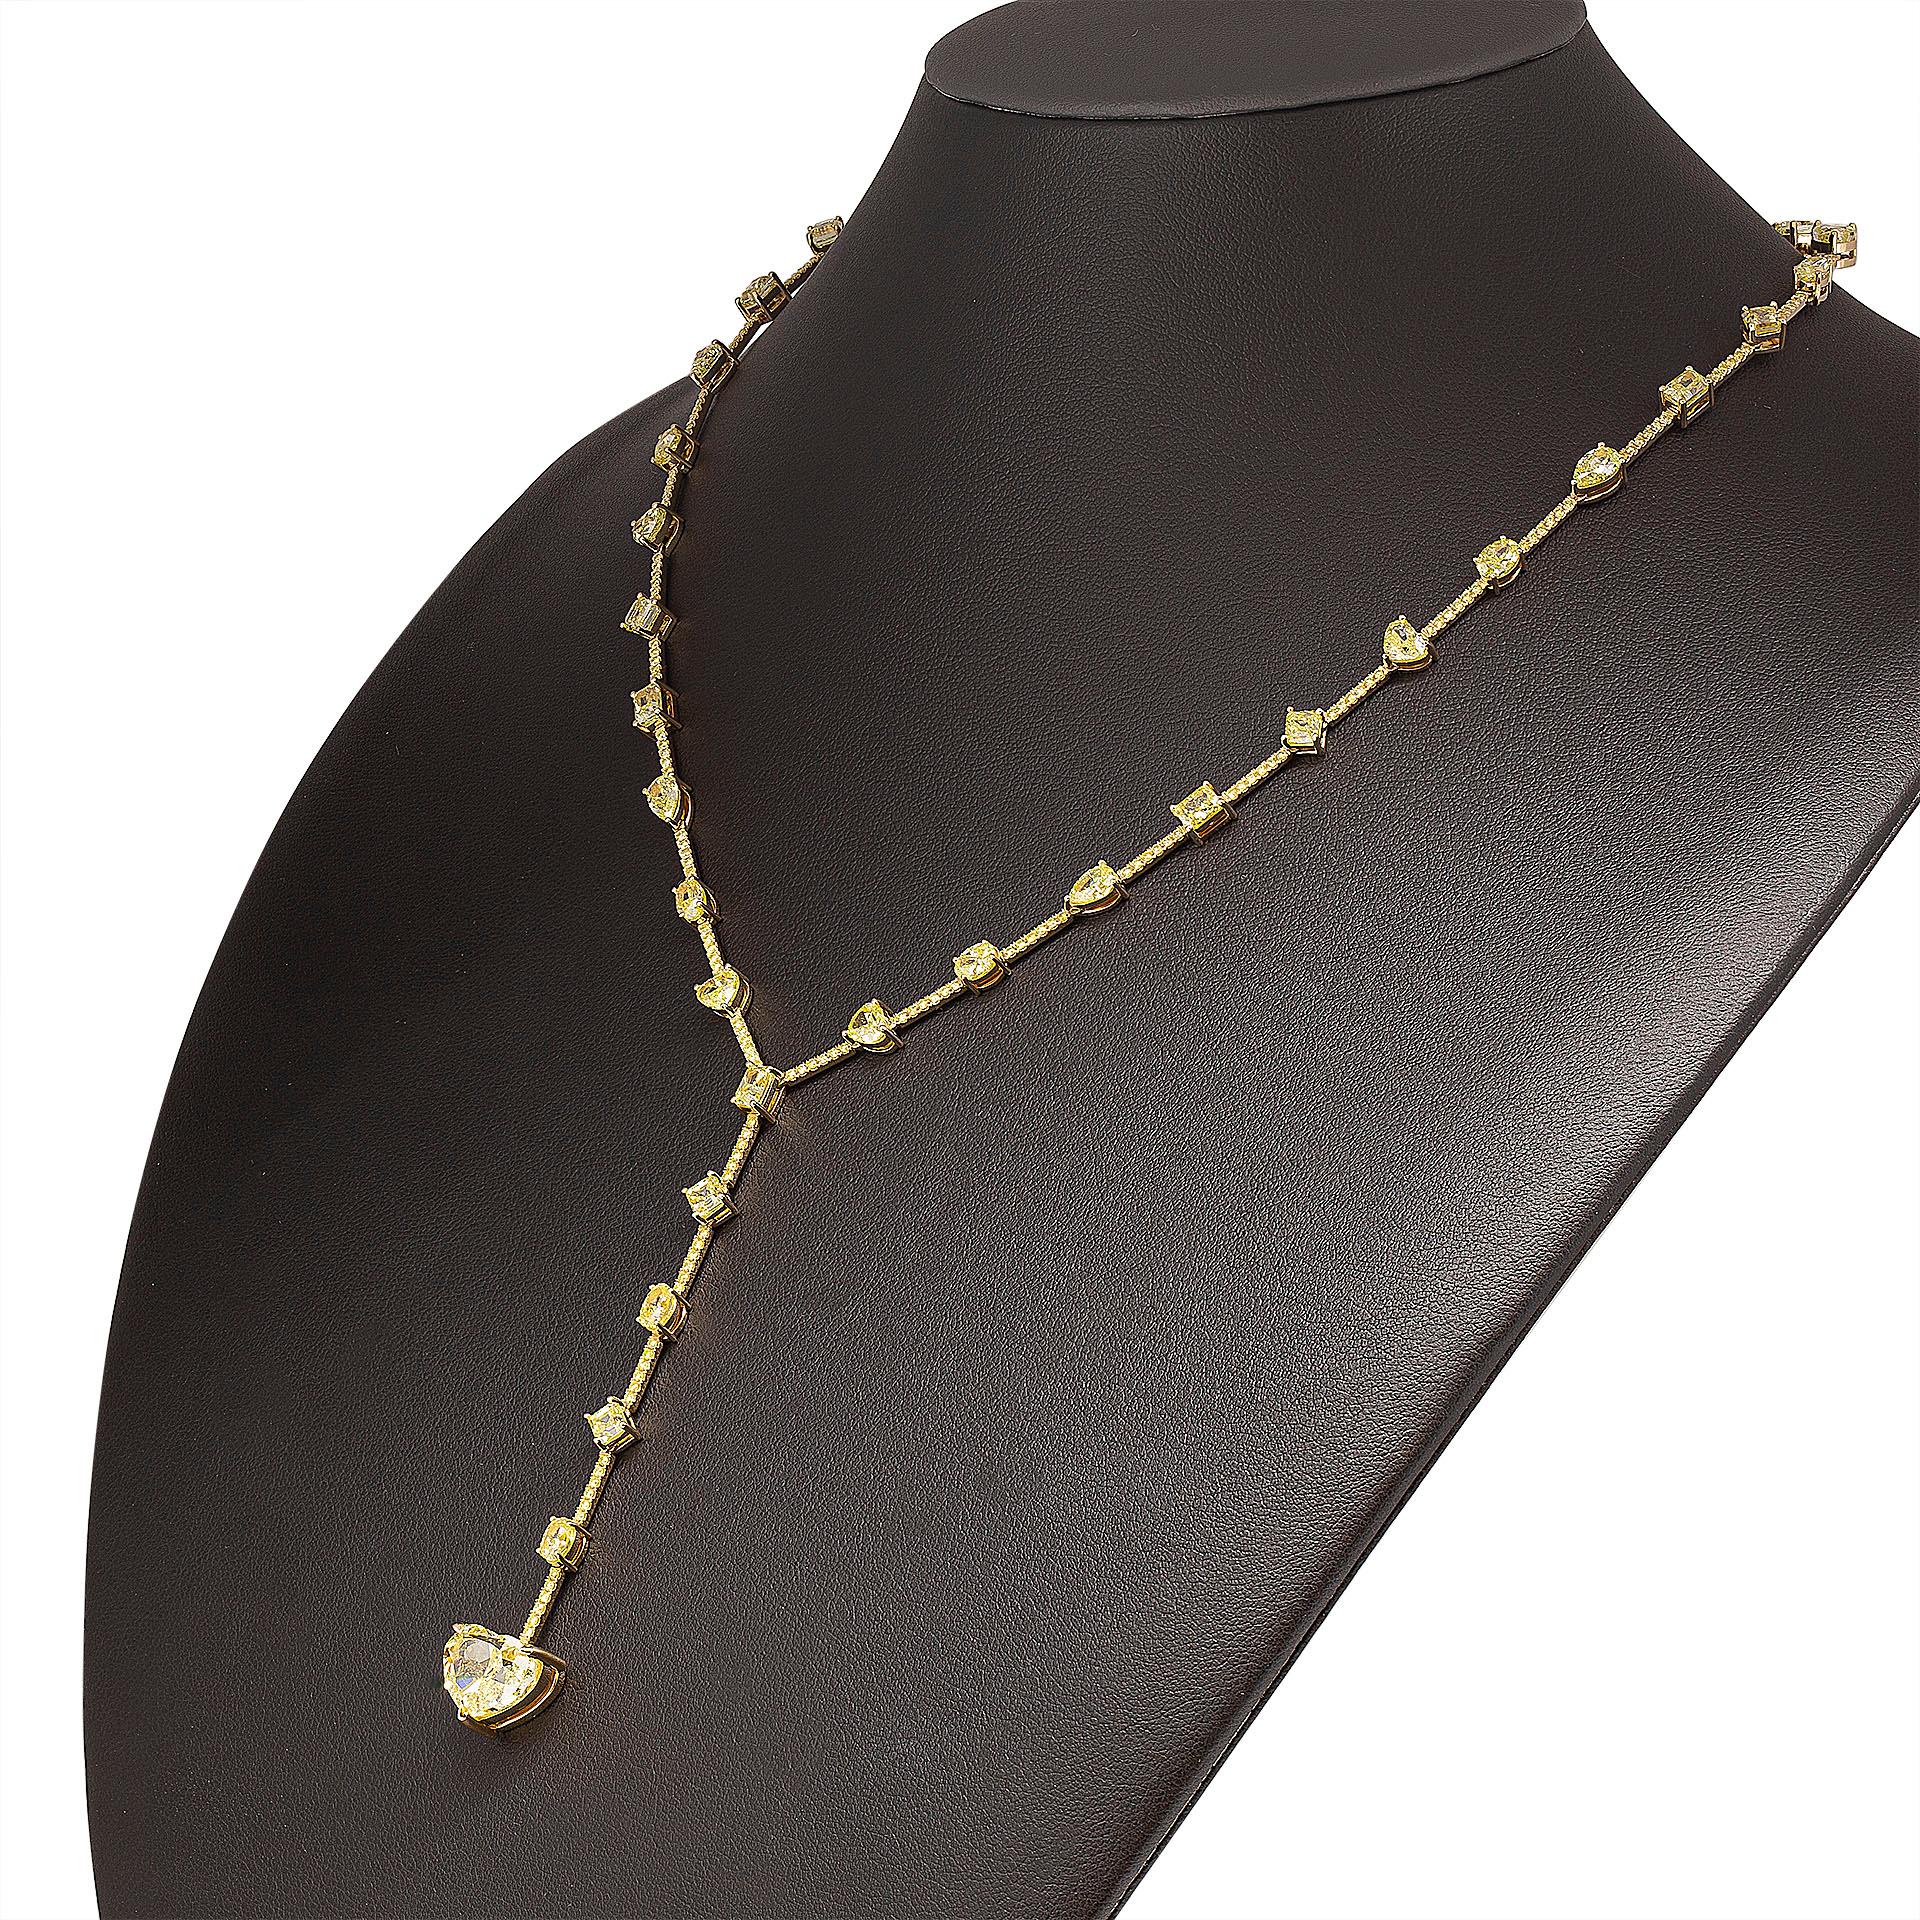 Fancy Yellow Diamond Lariat Tennis Necklace in 18K Yellow Gold

Center stone: 5.02ct Fancy Yellow VVS2 Heart Shape Brilliant GIA#7398890363 

Featuring Mixed Fancy Shape diamonds:
8st Fancy Yellow asscher cuts totaling 3.07ct 
8st heart shapes 